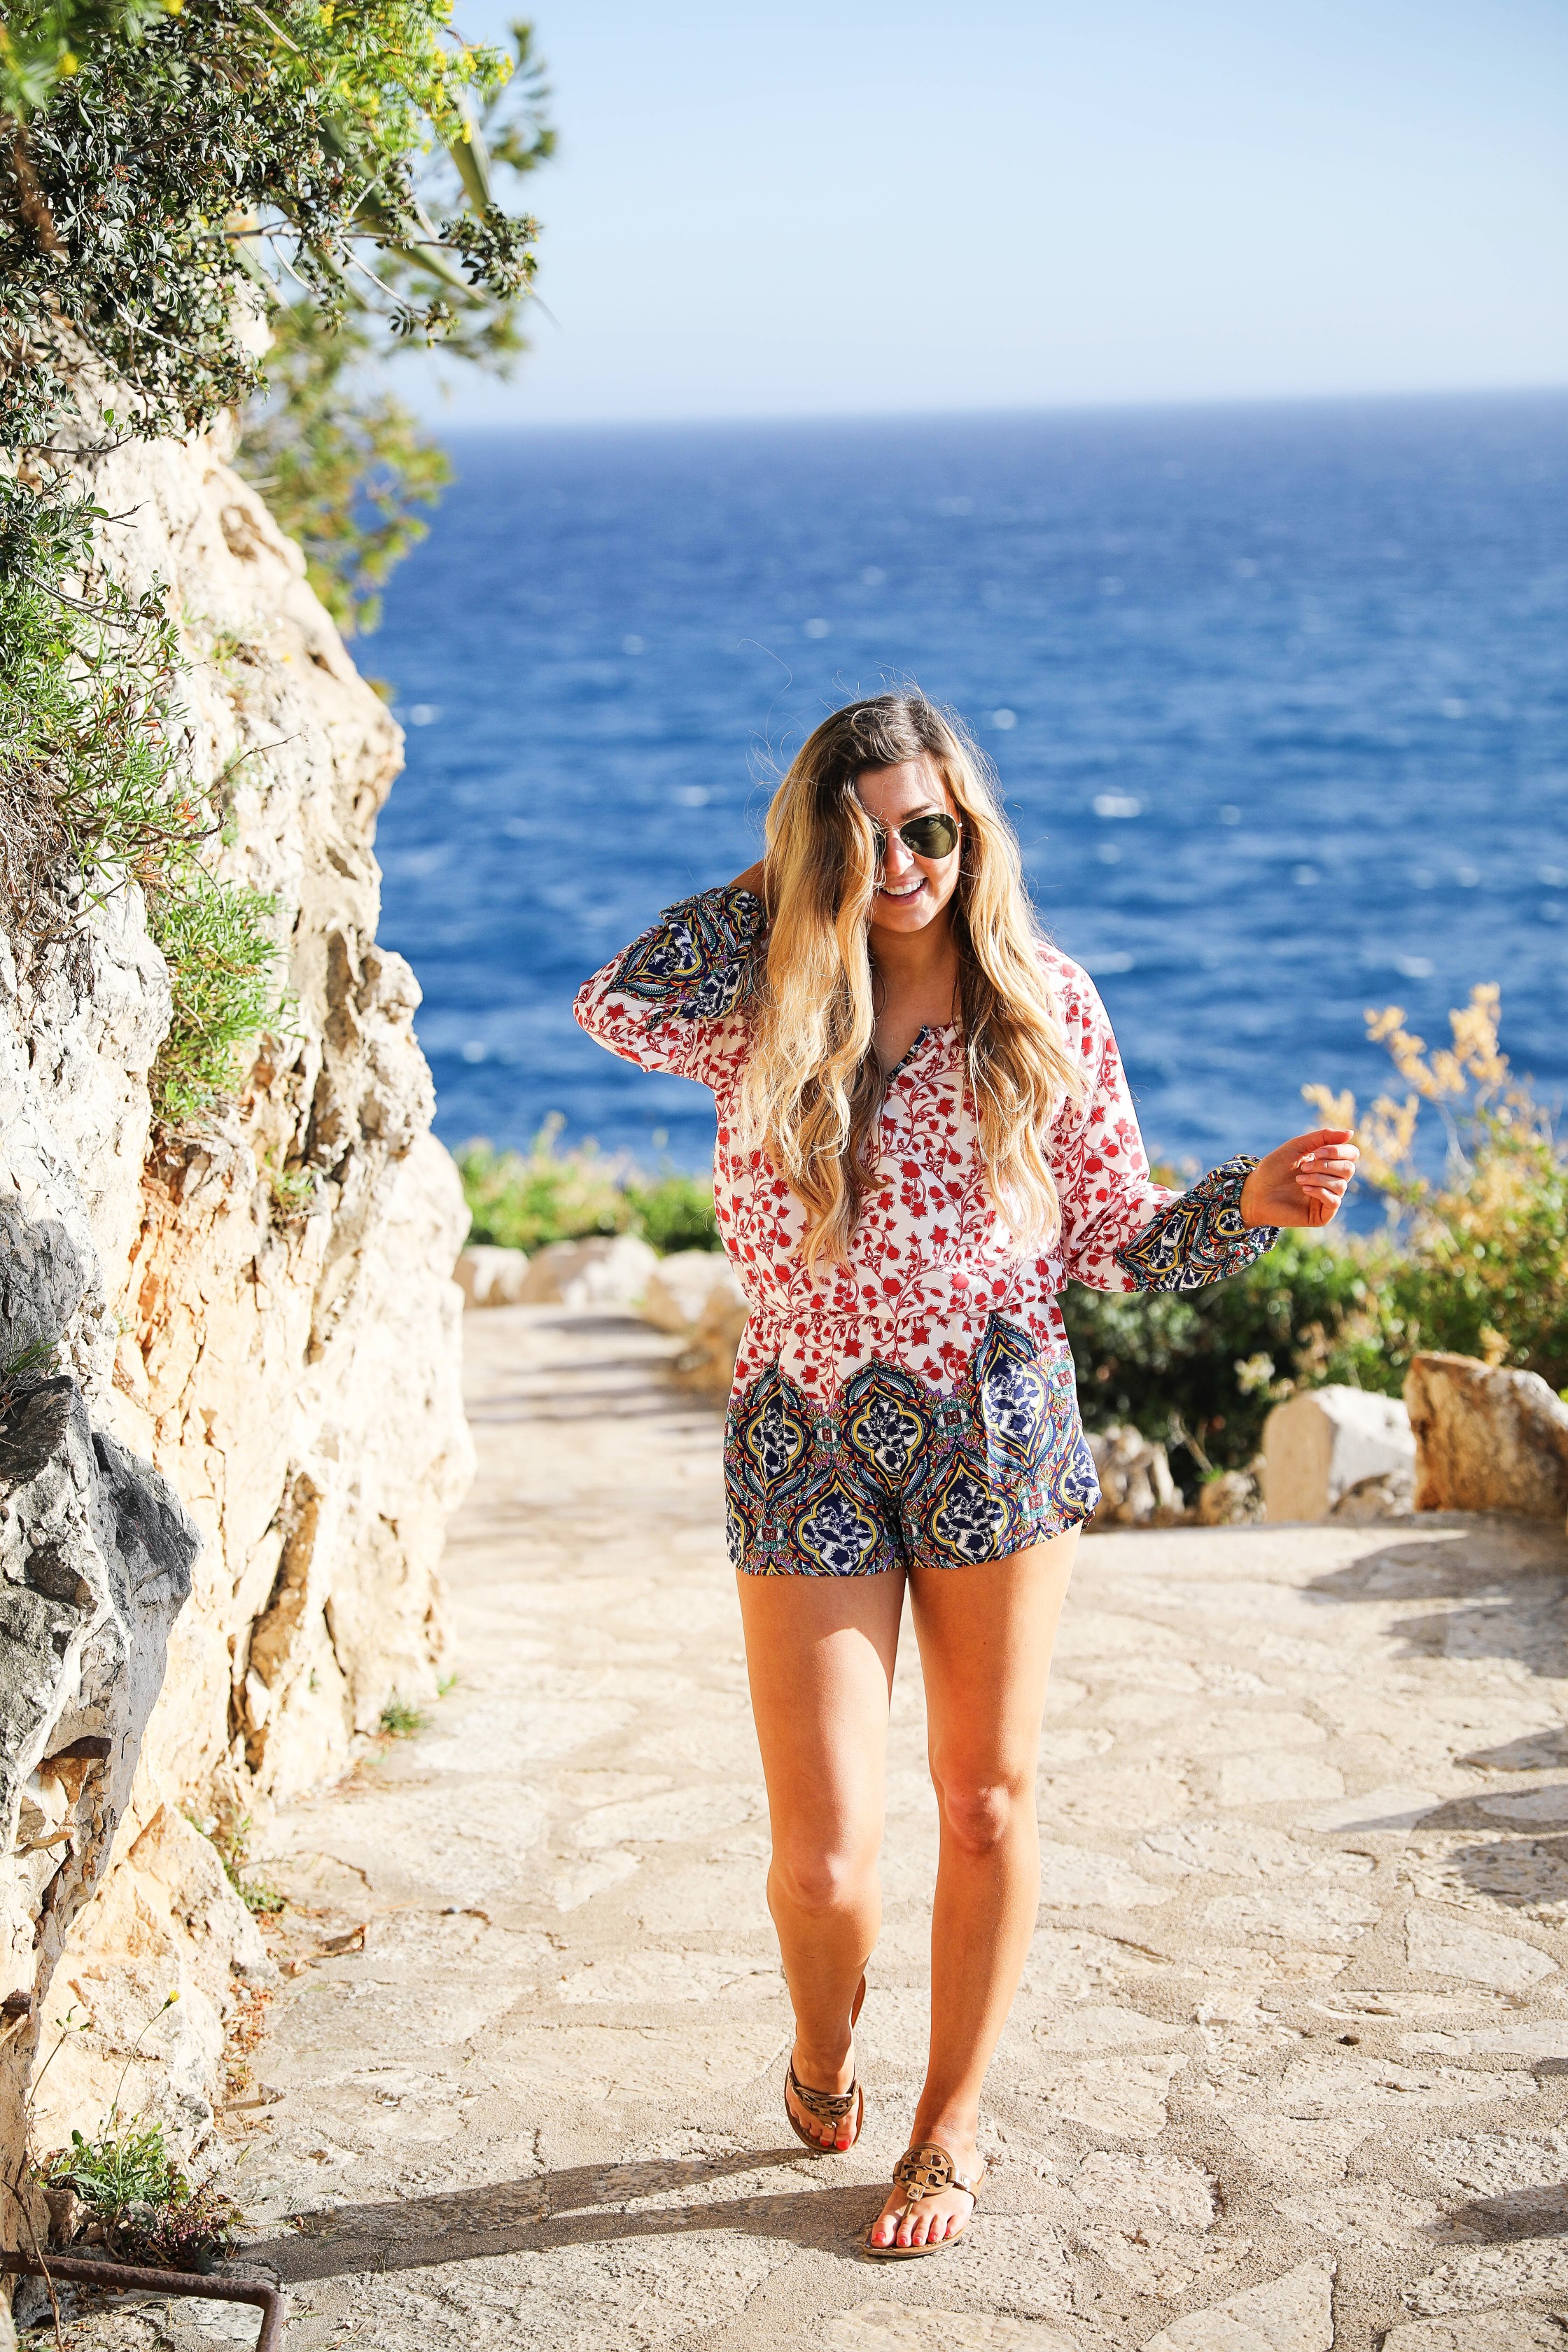 Romper by the ocean in Nice, France. The perfect outfit for a beach day! By Lauren Lindmark on dailydoseofcharm.com daily dose of charm fashion blog